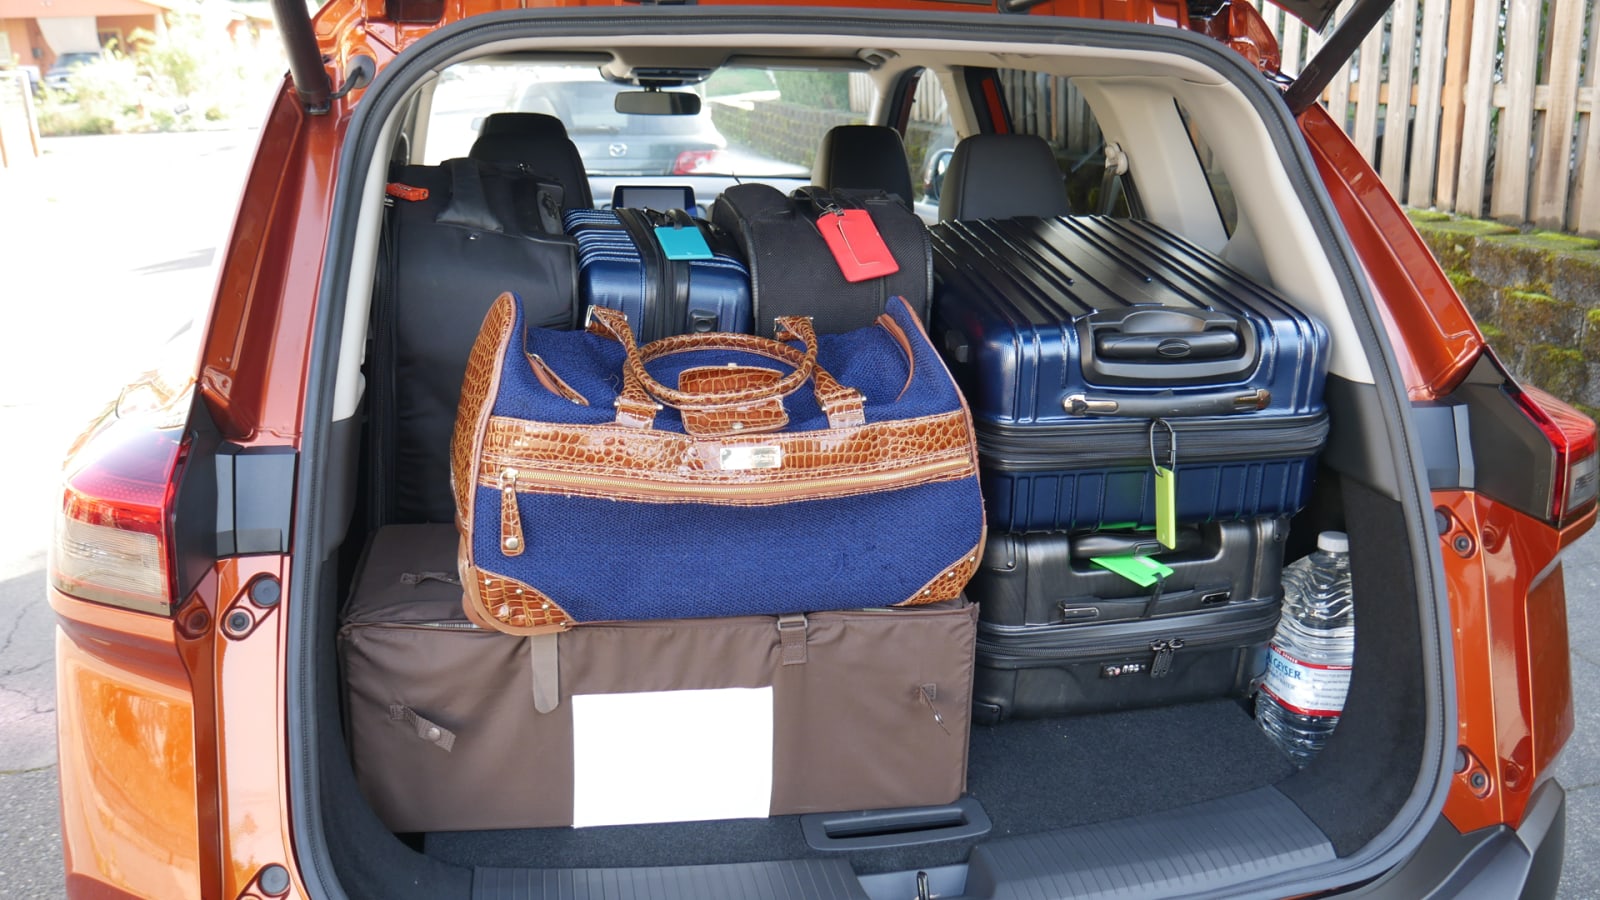 2021 Nissan Rogue Luggage Test How much fits in the cargo area